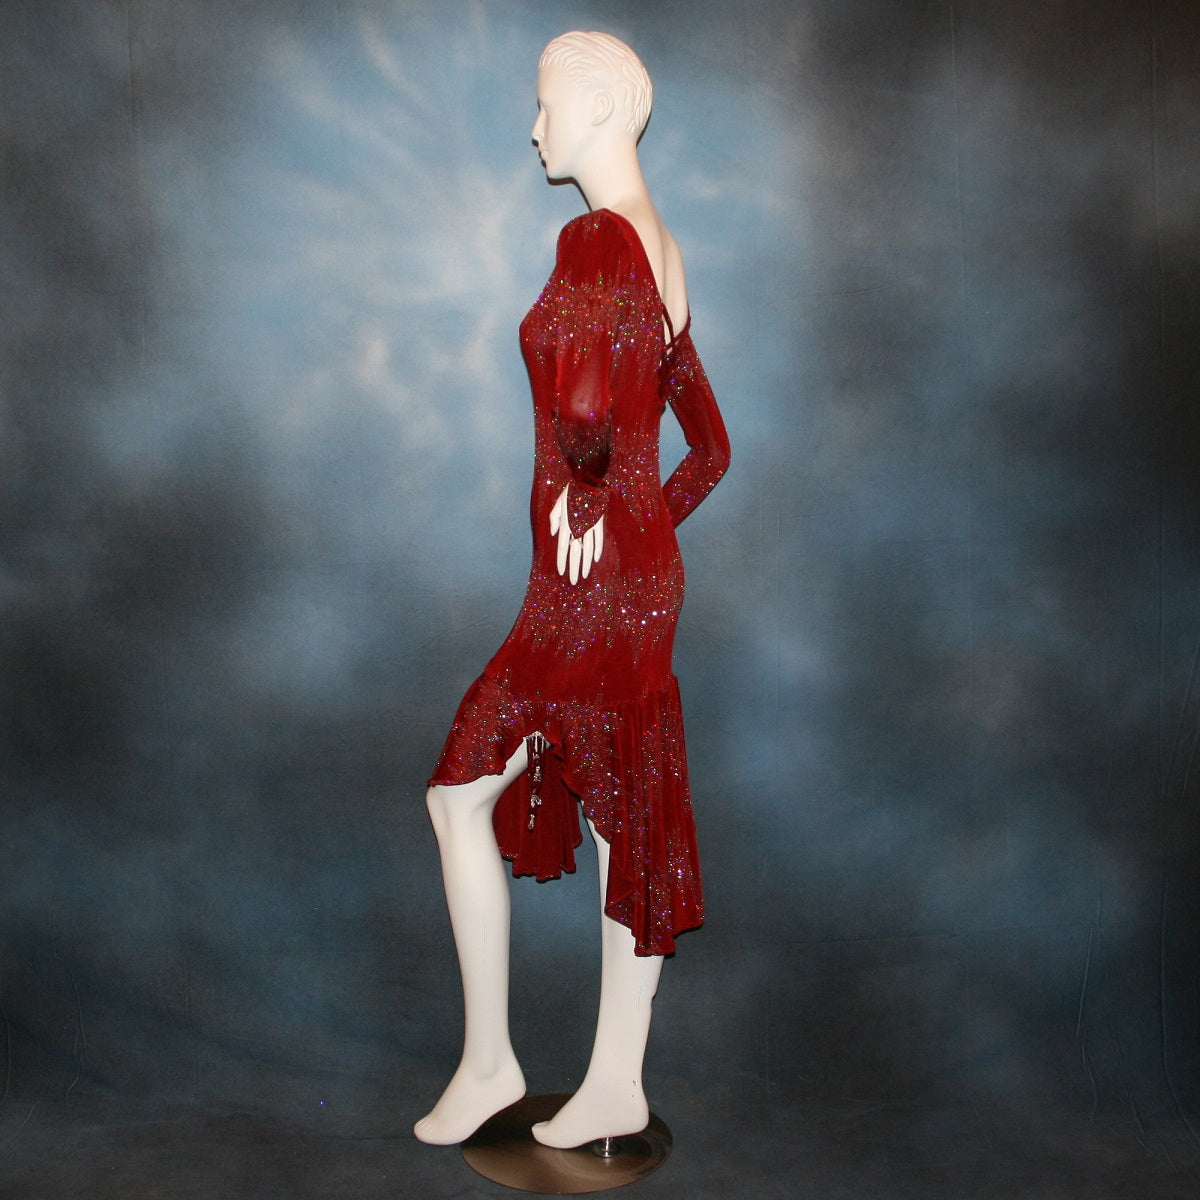 left side view of Deep scarlette red Latin/rhythm/tango dress created in glitter slinky with an awesome electrifying glitter pattern features lattice detailing in the back, long sleeves with Swarovski hand beading in the skirt sides.